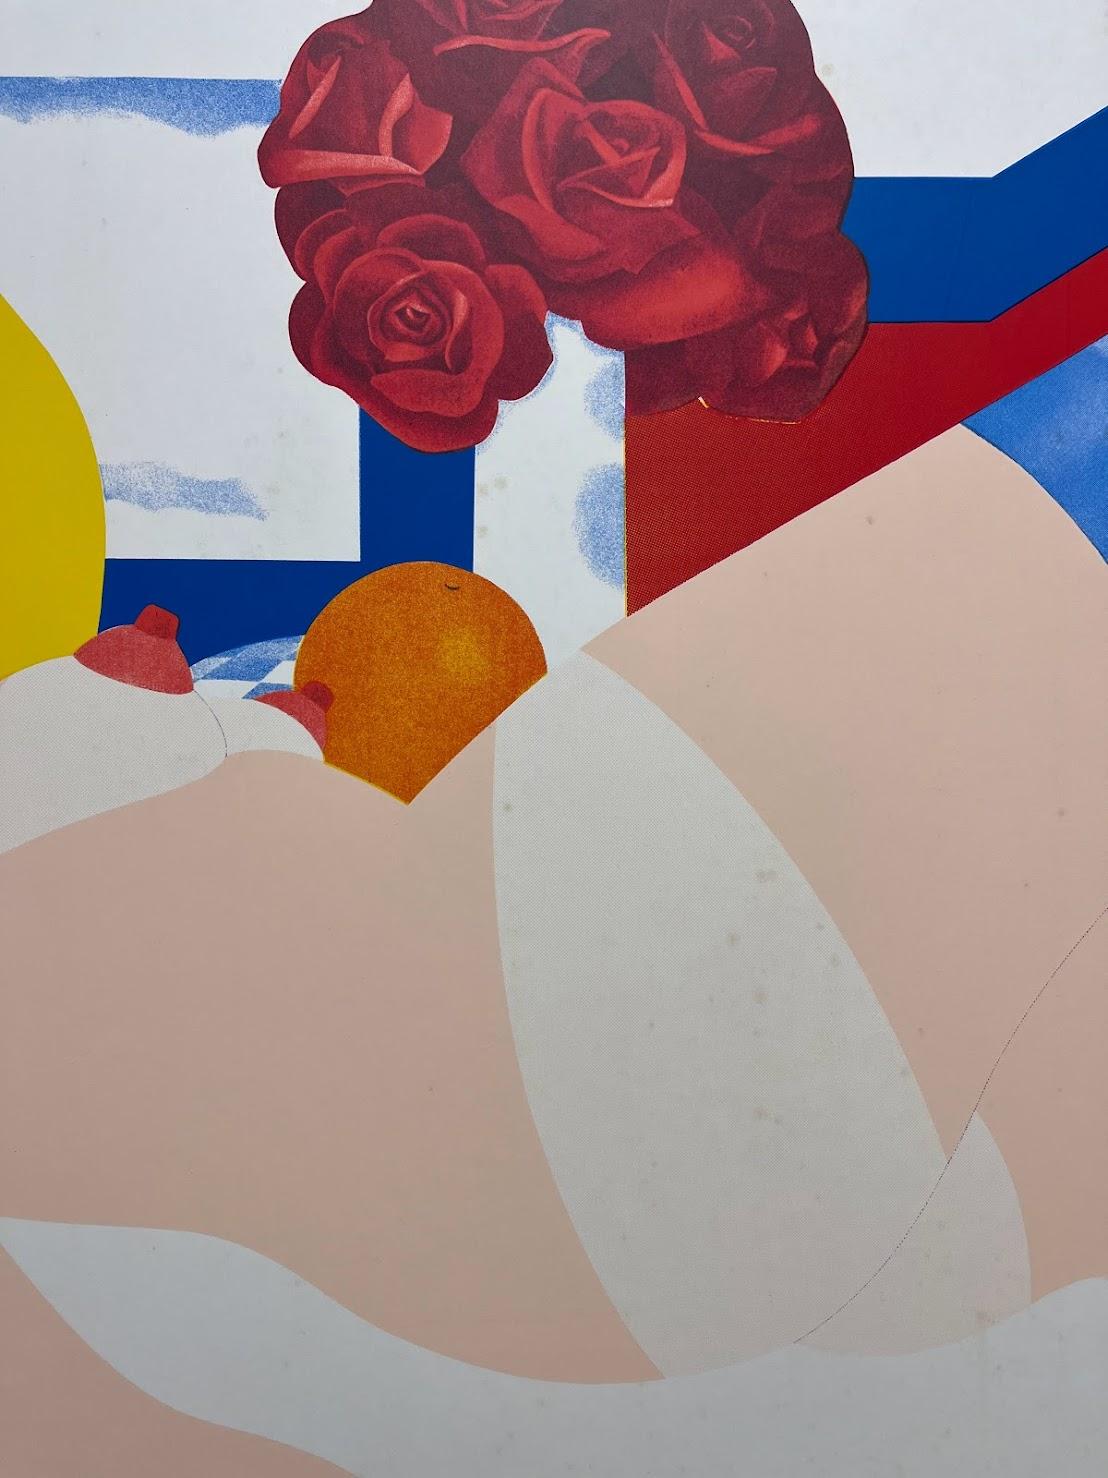 This vibrant Tom Wesselmann poster is original serigraph from 1968. Although in good condition, please note that there is foxing present. 

Please contact with any further questions!